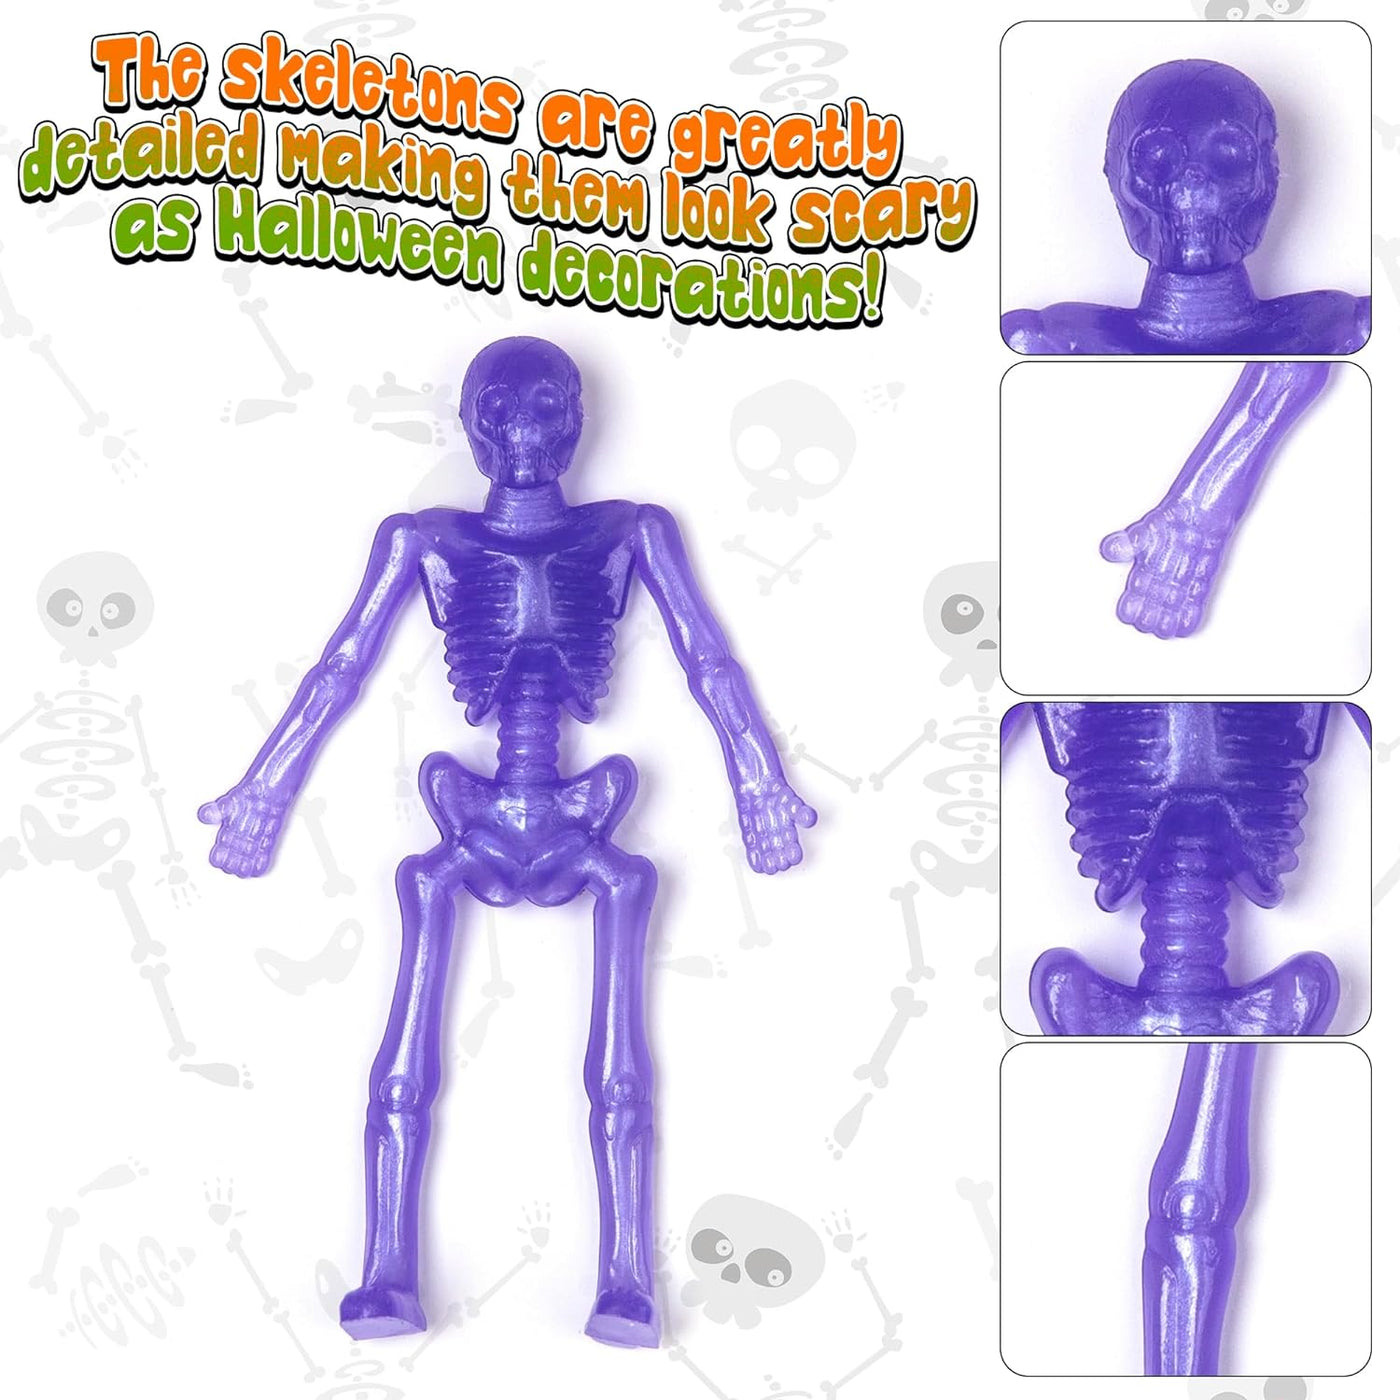 Super Stretchy Skeleton Toys - Set of 48 - Halloween Toys for Kids in 10 Vibrant Colors - Stretch 7X Their Size